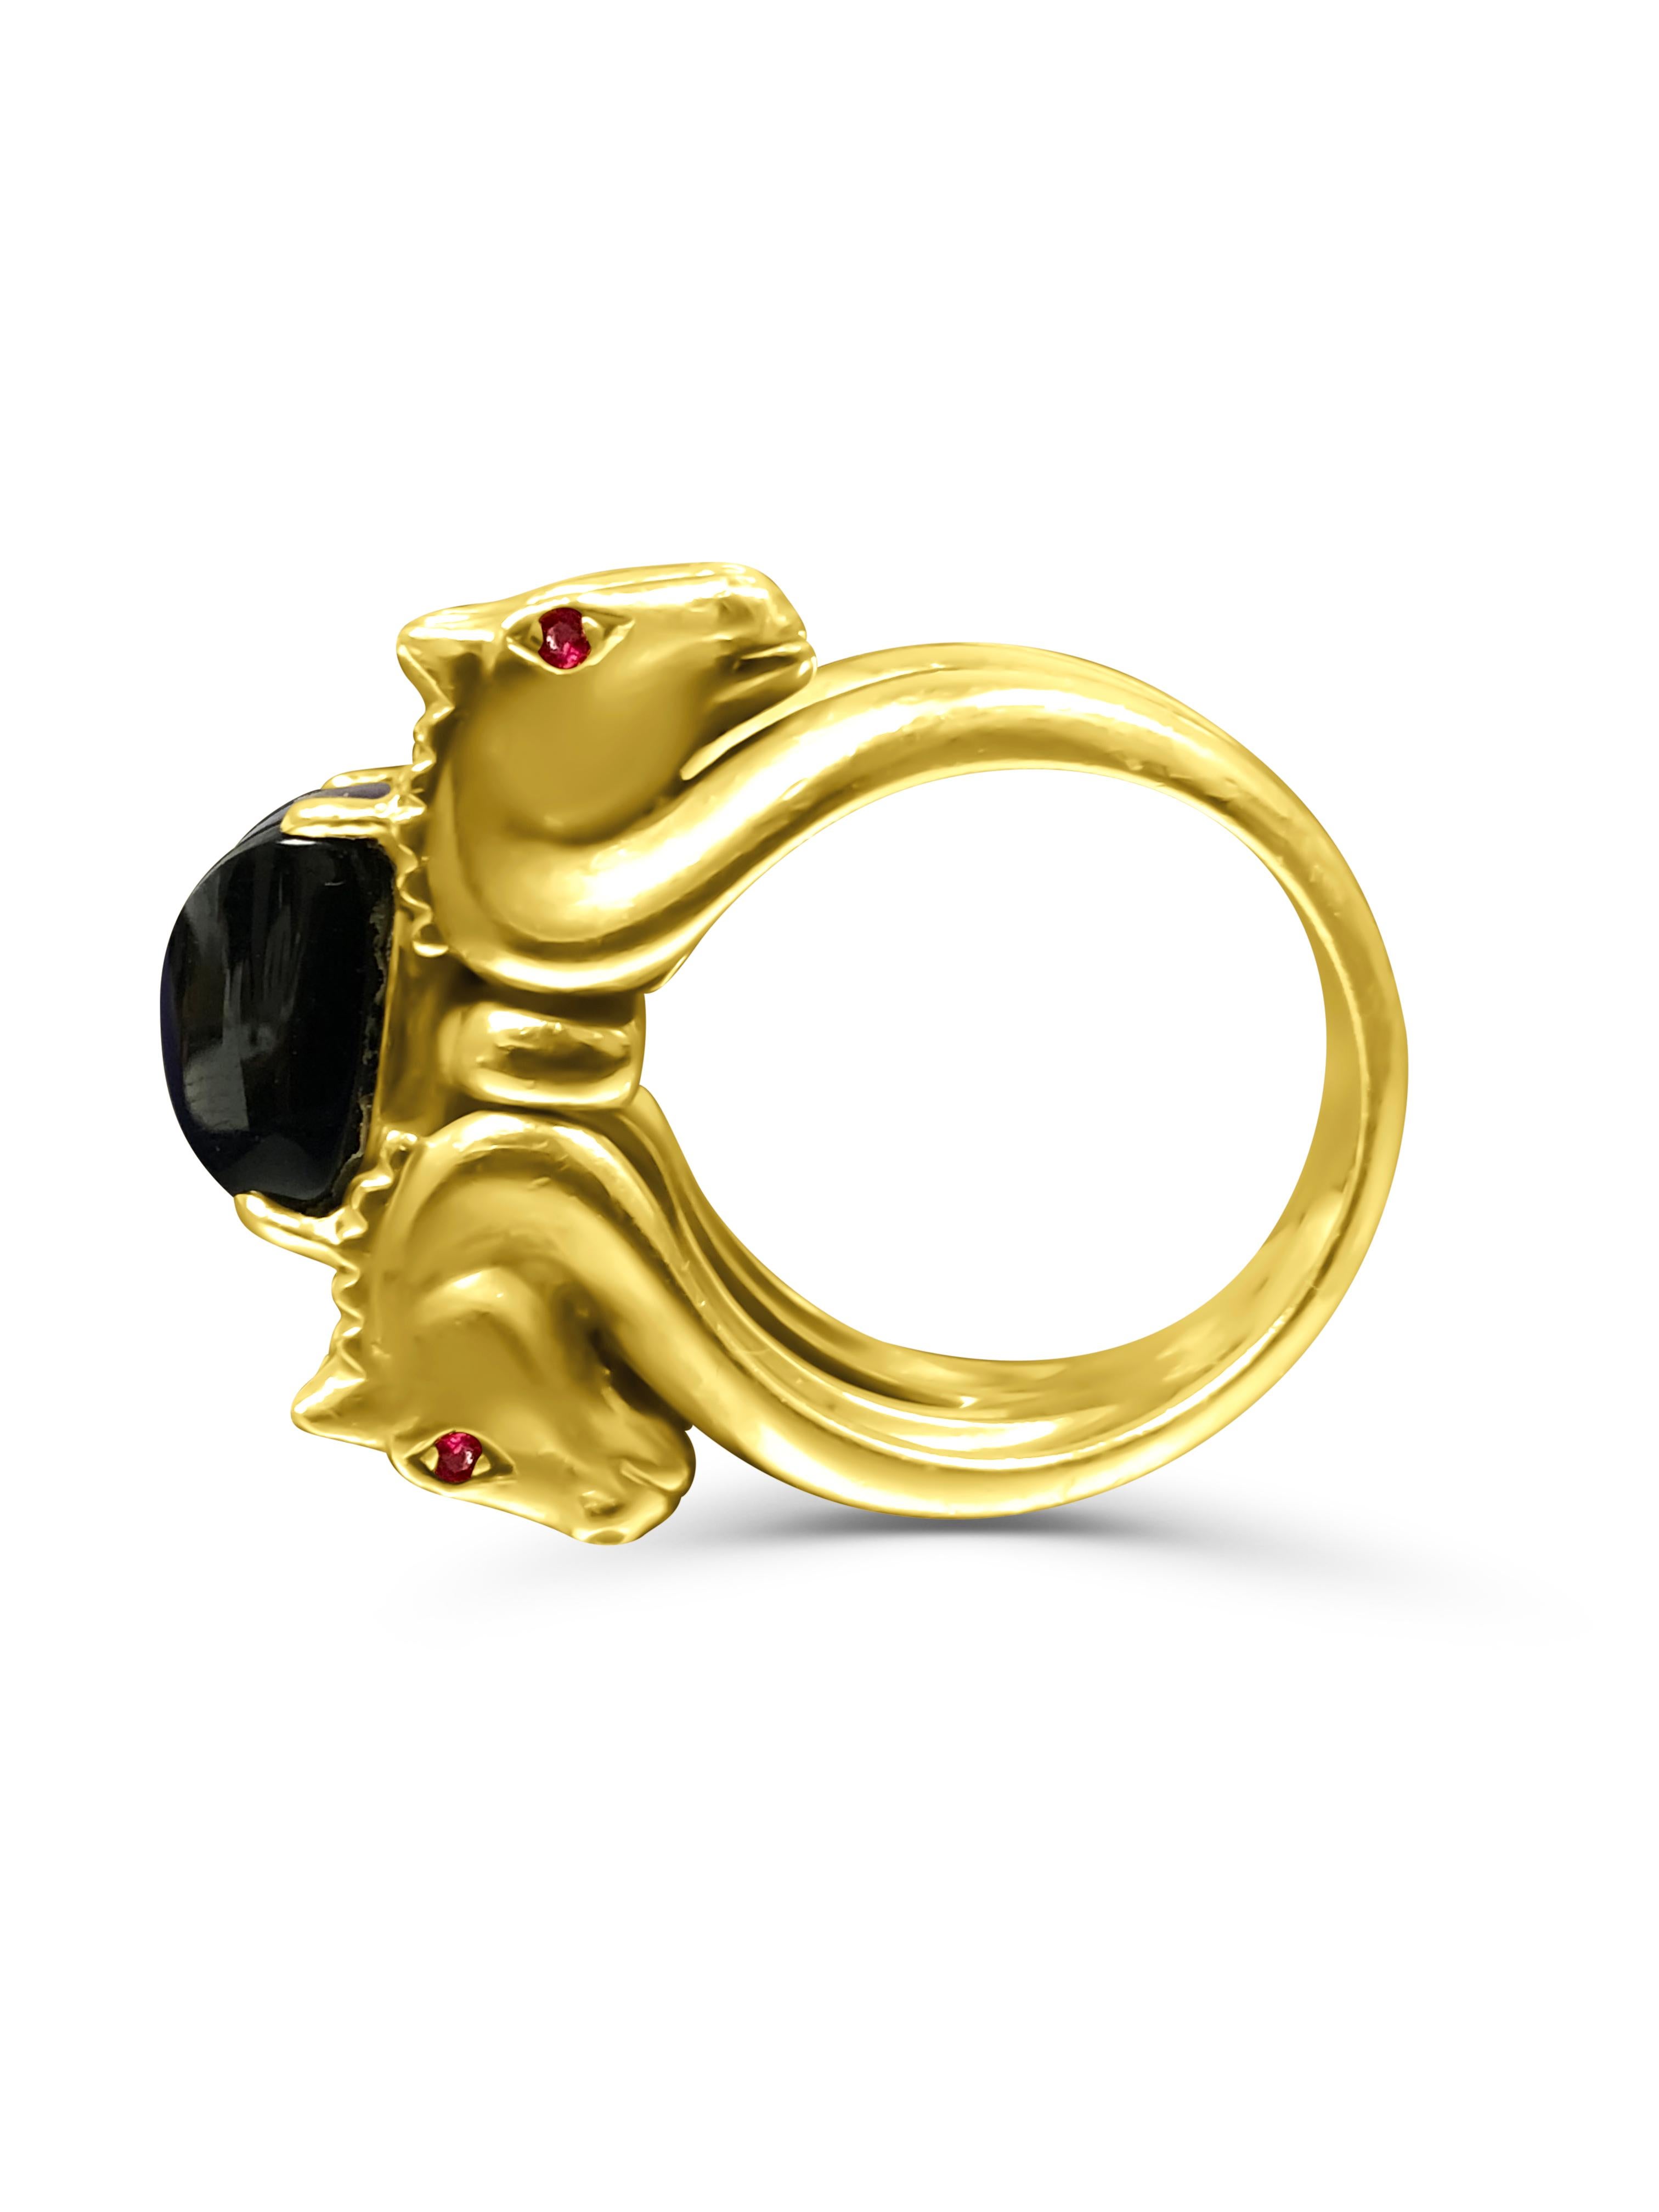 gold ring with horse